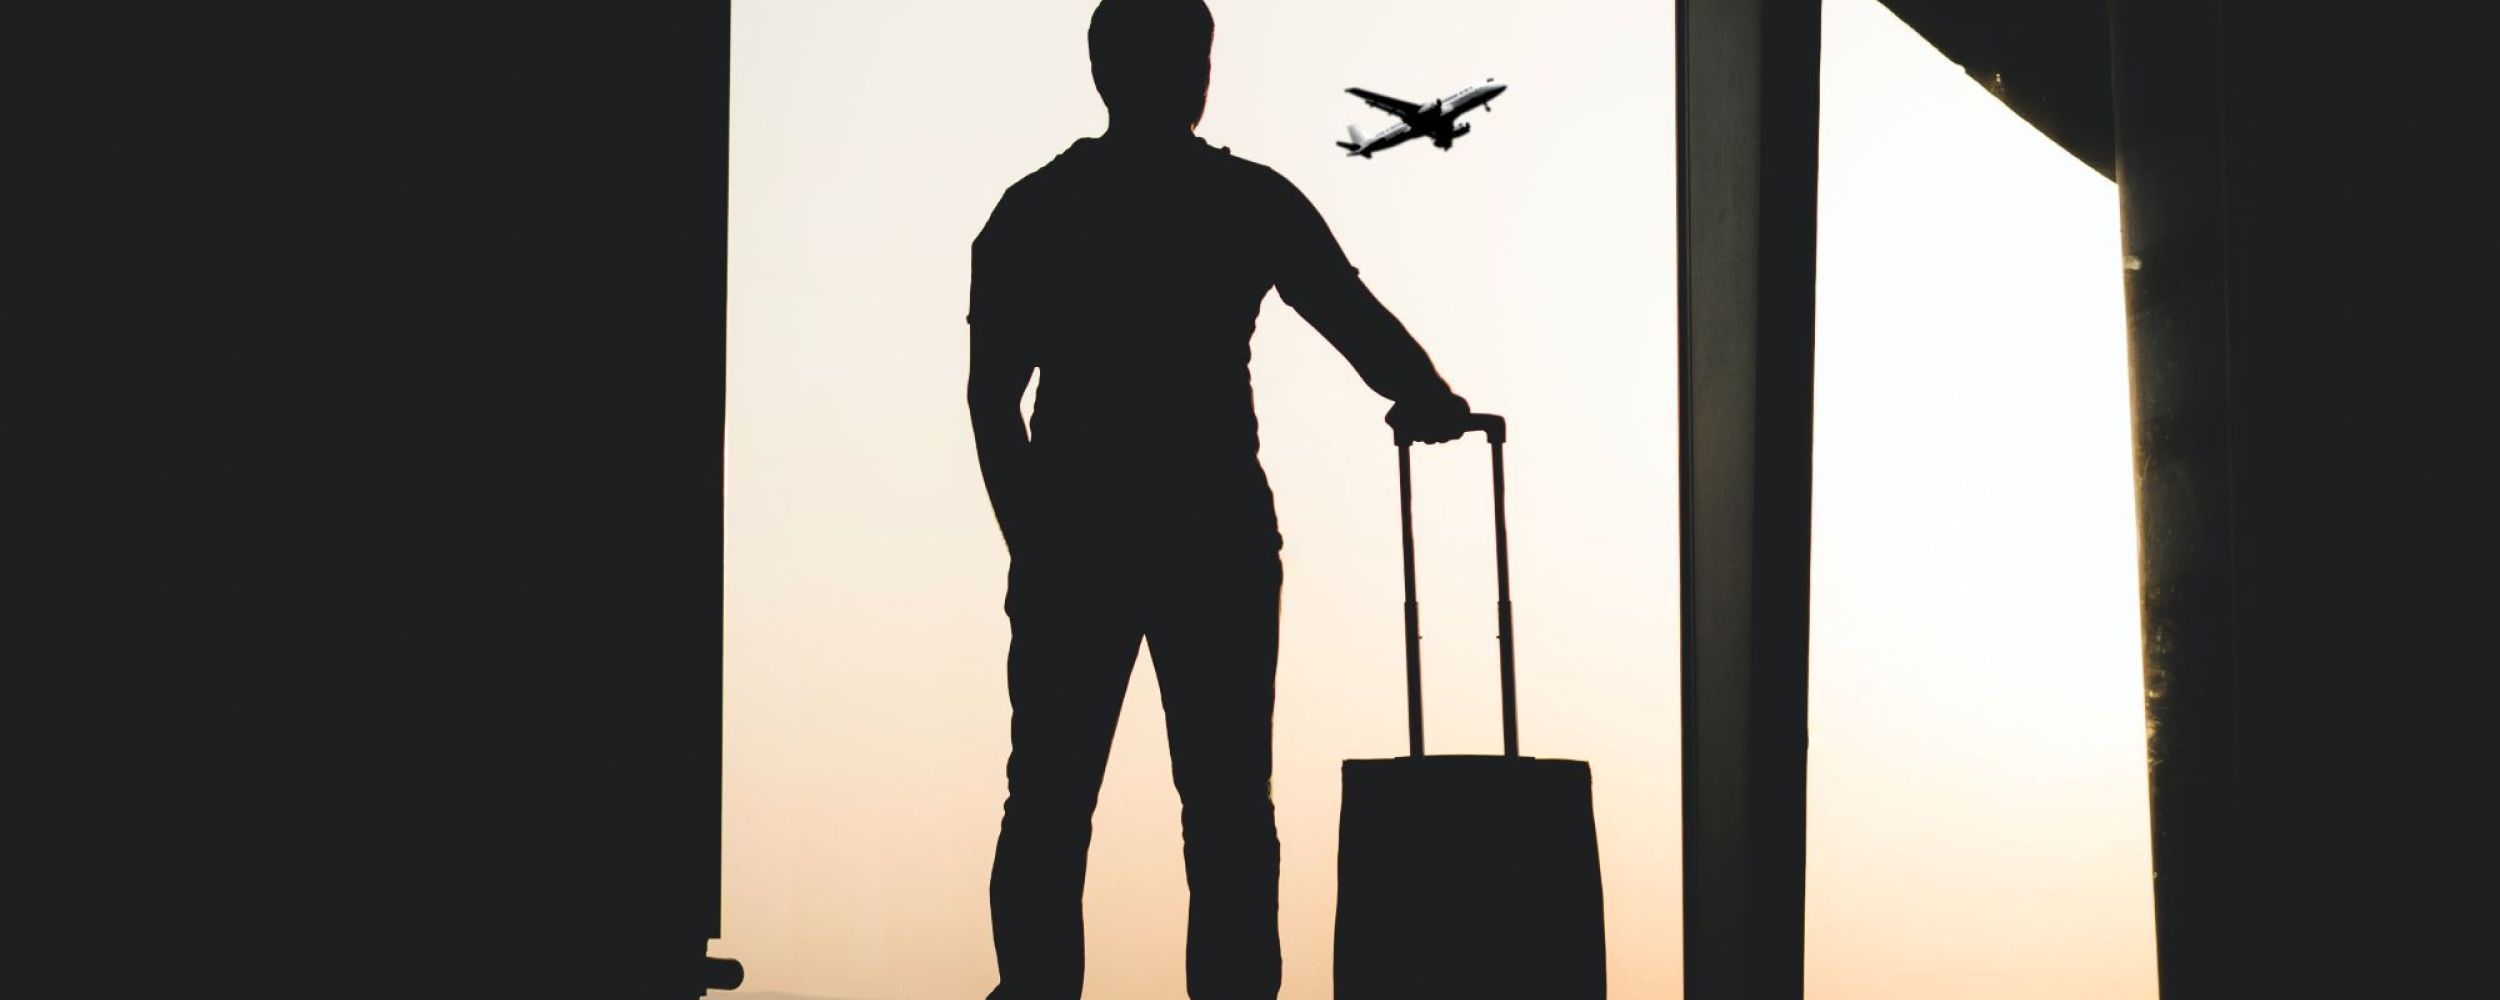 travel pic of man with suitcase.jpg